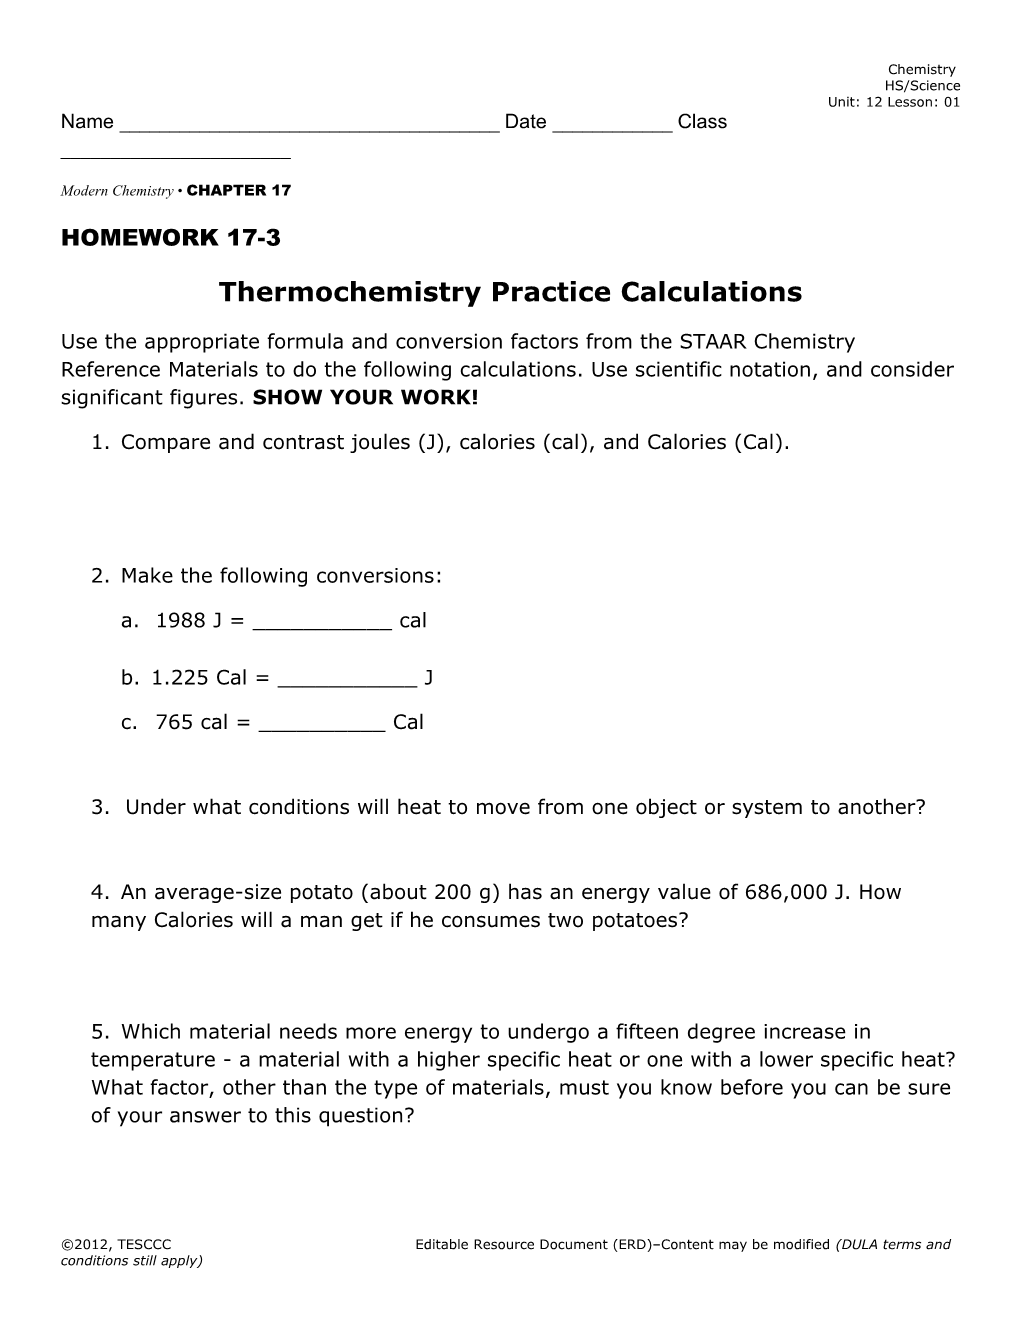 Thermochemistry Practice Calculations